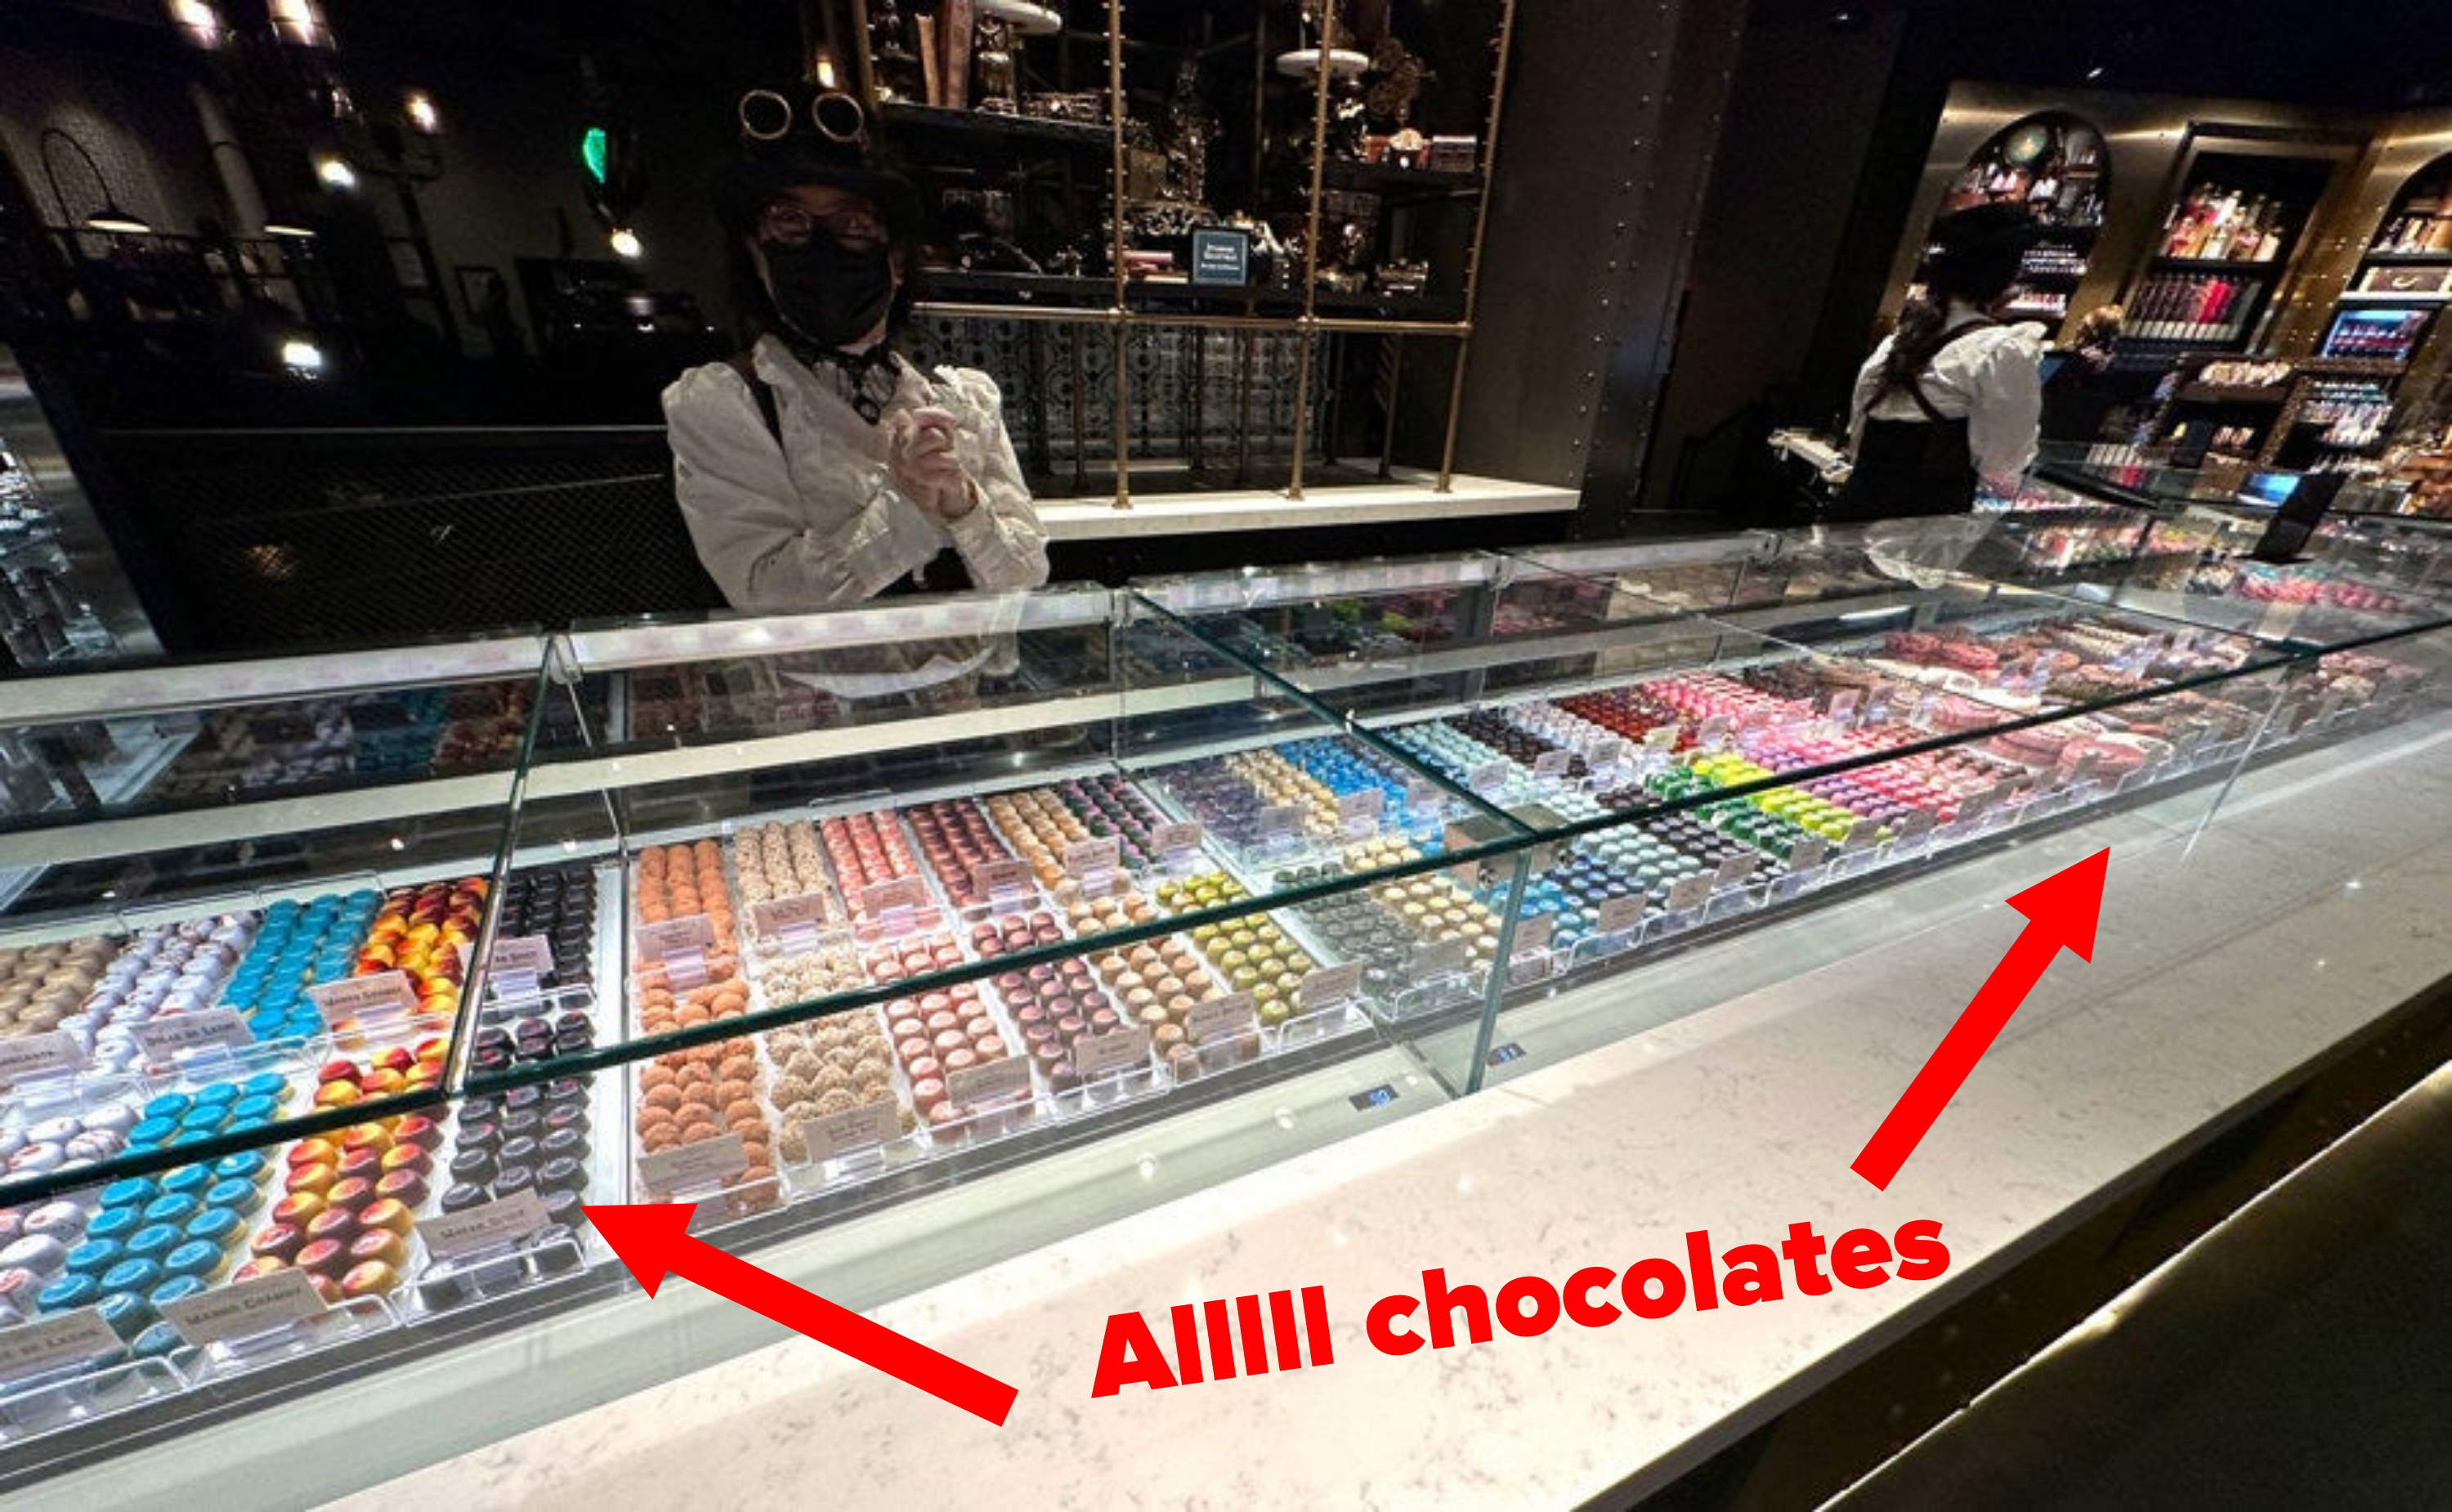 A candy counter with rows and rows of different chocolate truffle flavors